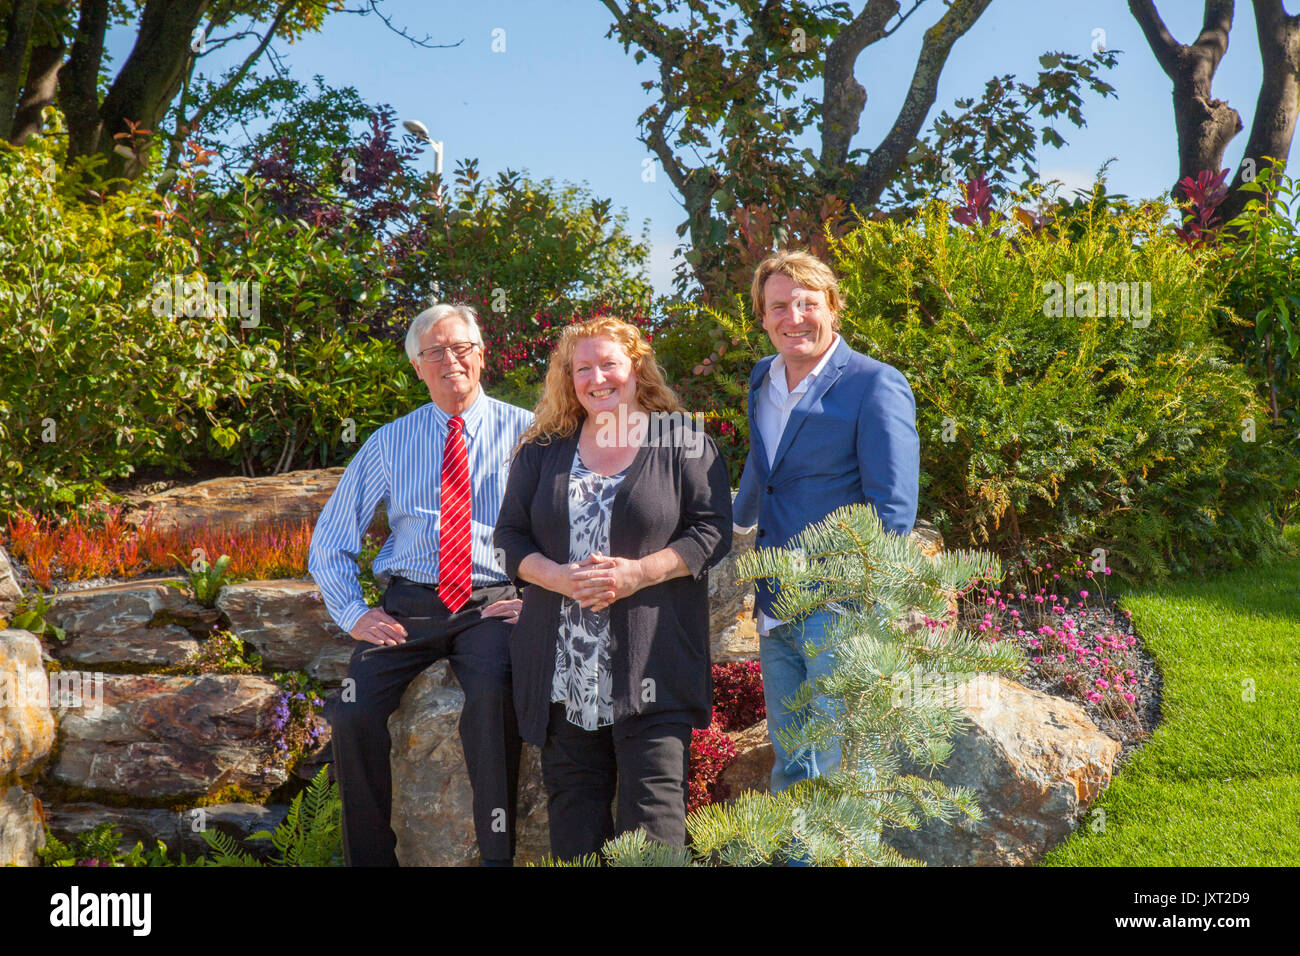 David Domoney, Charlie Dimmock, & John Craven at the Opening day at Southport Flower Show as TV presenters, garden designers, and floral experts, professional gardeners await the arrival of up to 80,000 visitors who are expected to attend to this famous annual event. Stock Photo